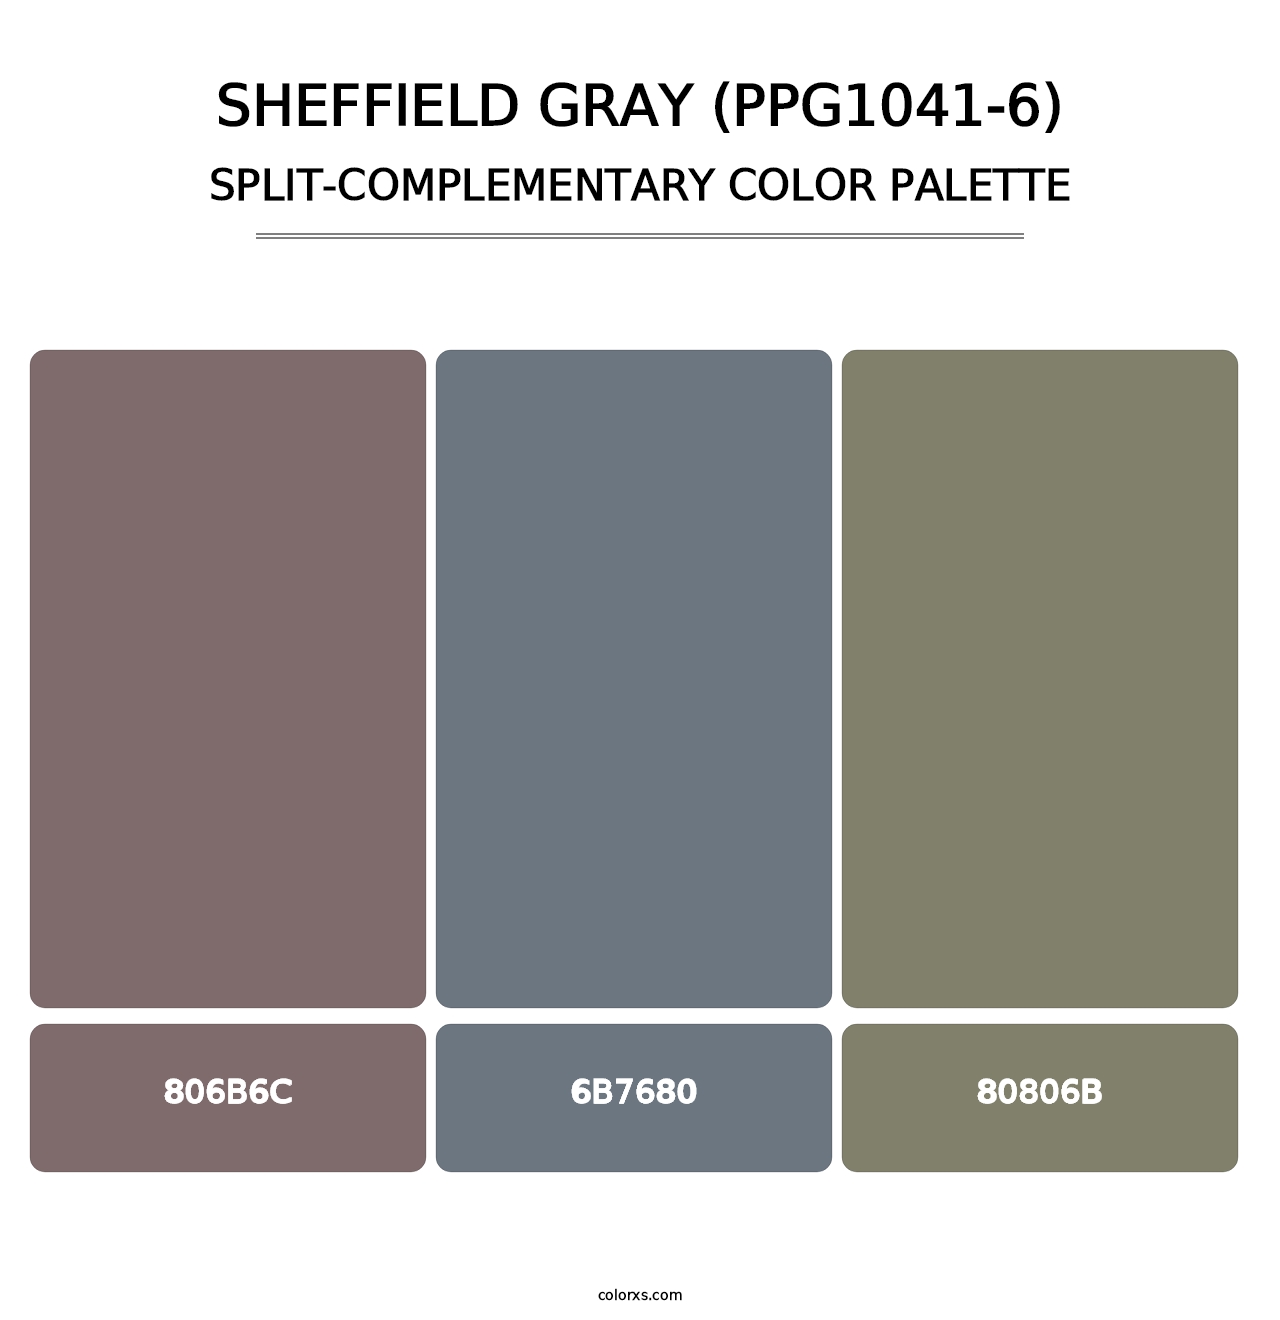 Sheffield Gray (PPG1041-6) - Split-Complementary Color Palette